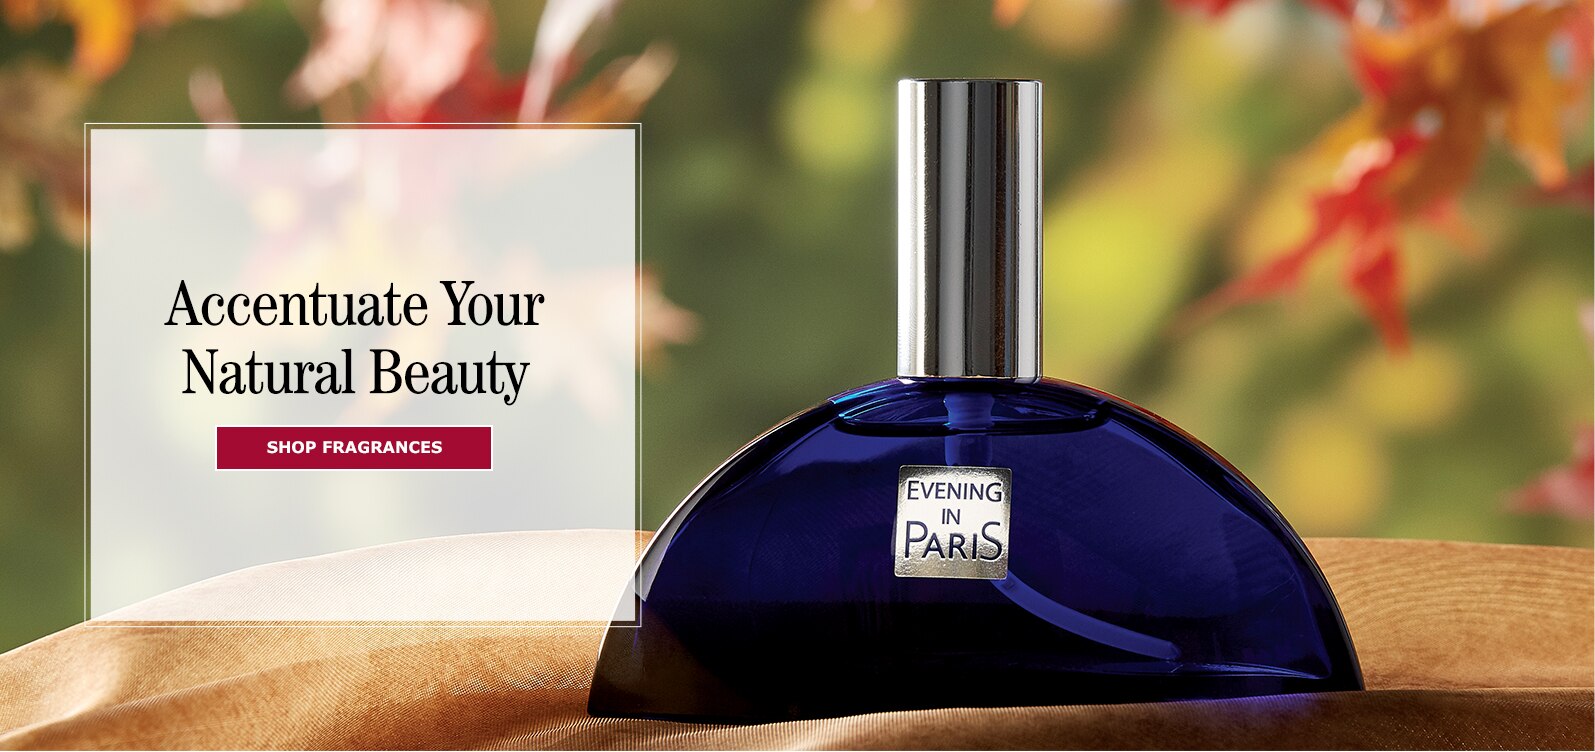 Accentuate Your Natural Beauty. Shop Fragrance.